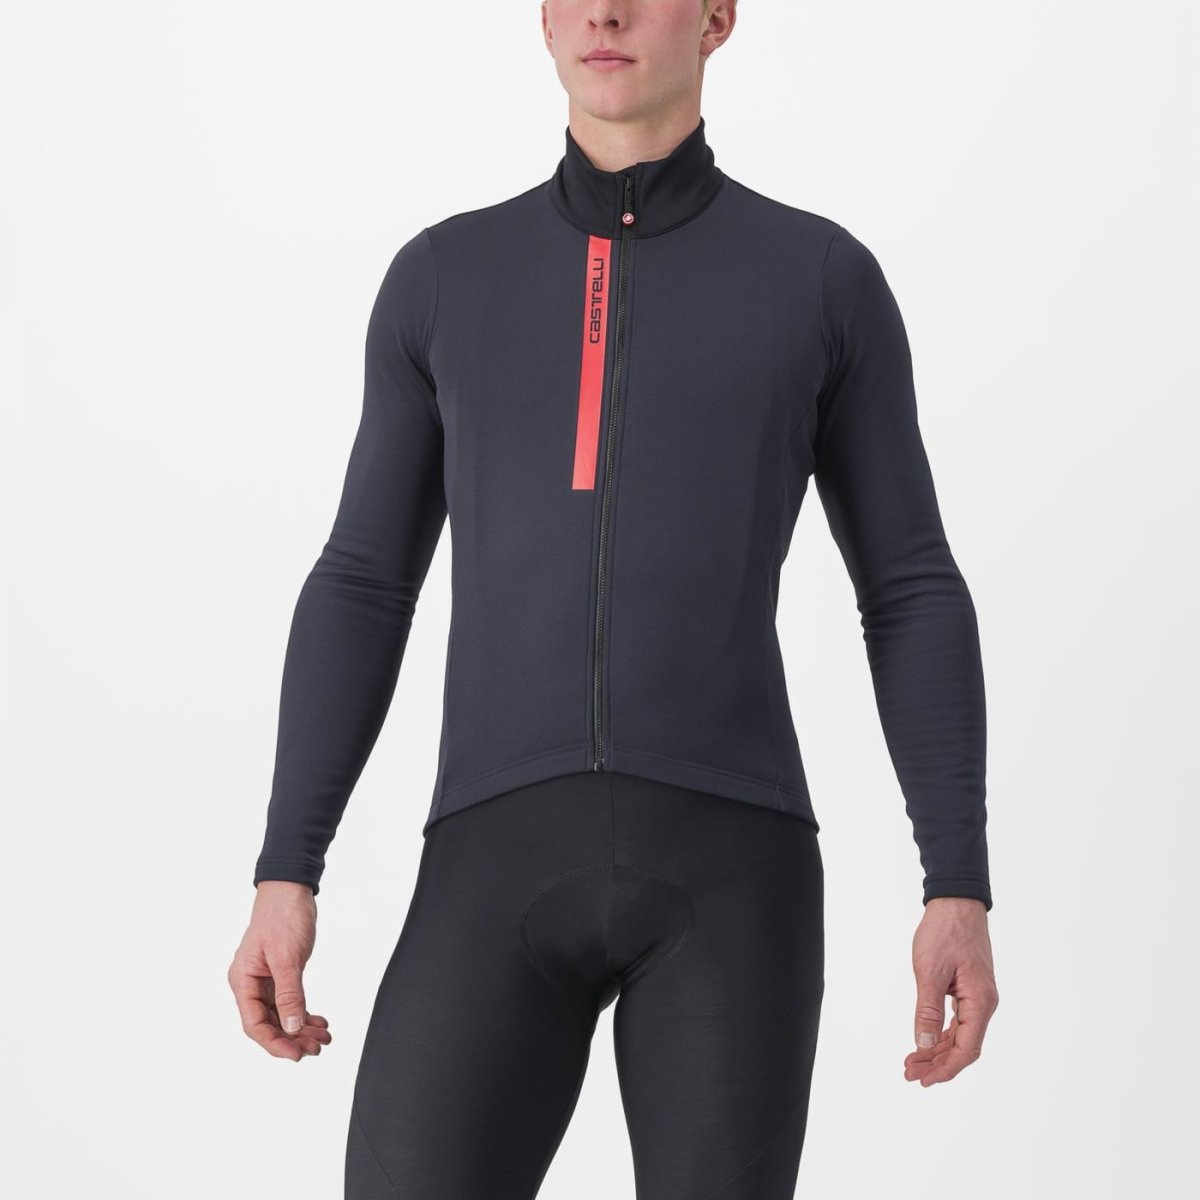 Men's Black Thermal Cycling Jersey, Cool/Cold Weather